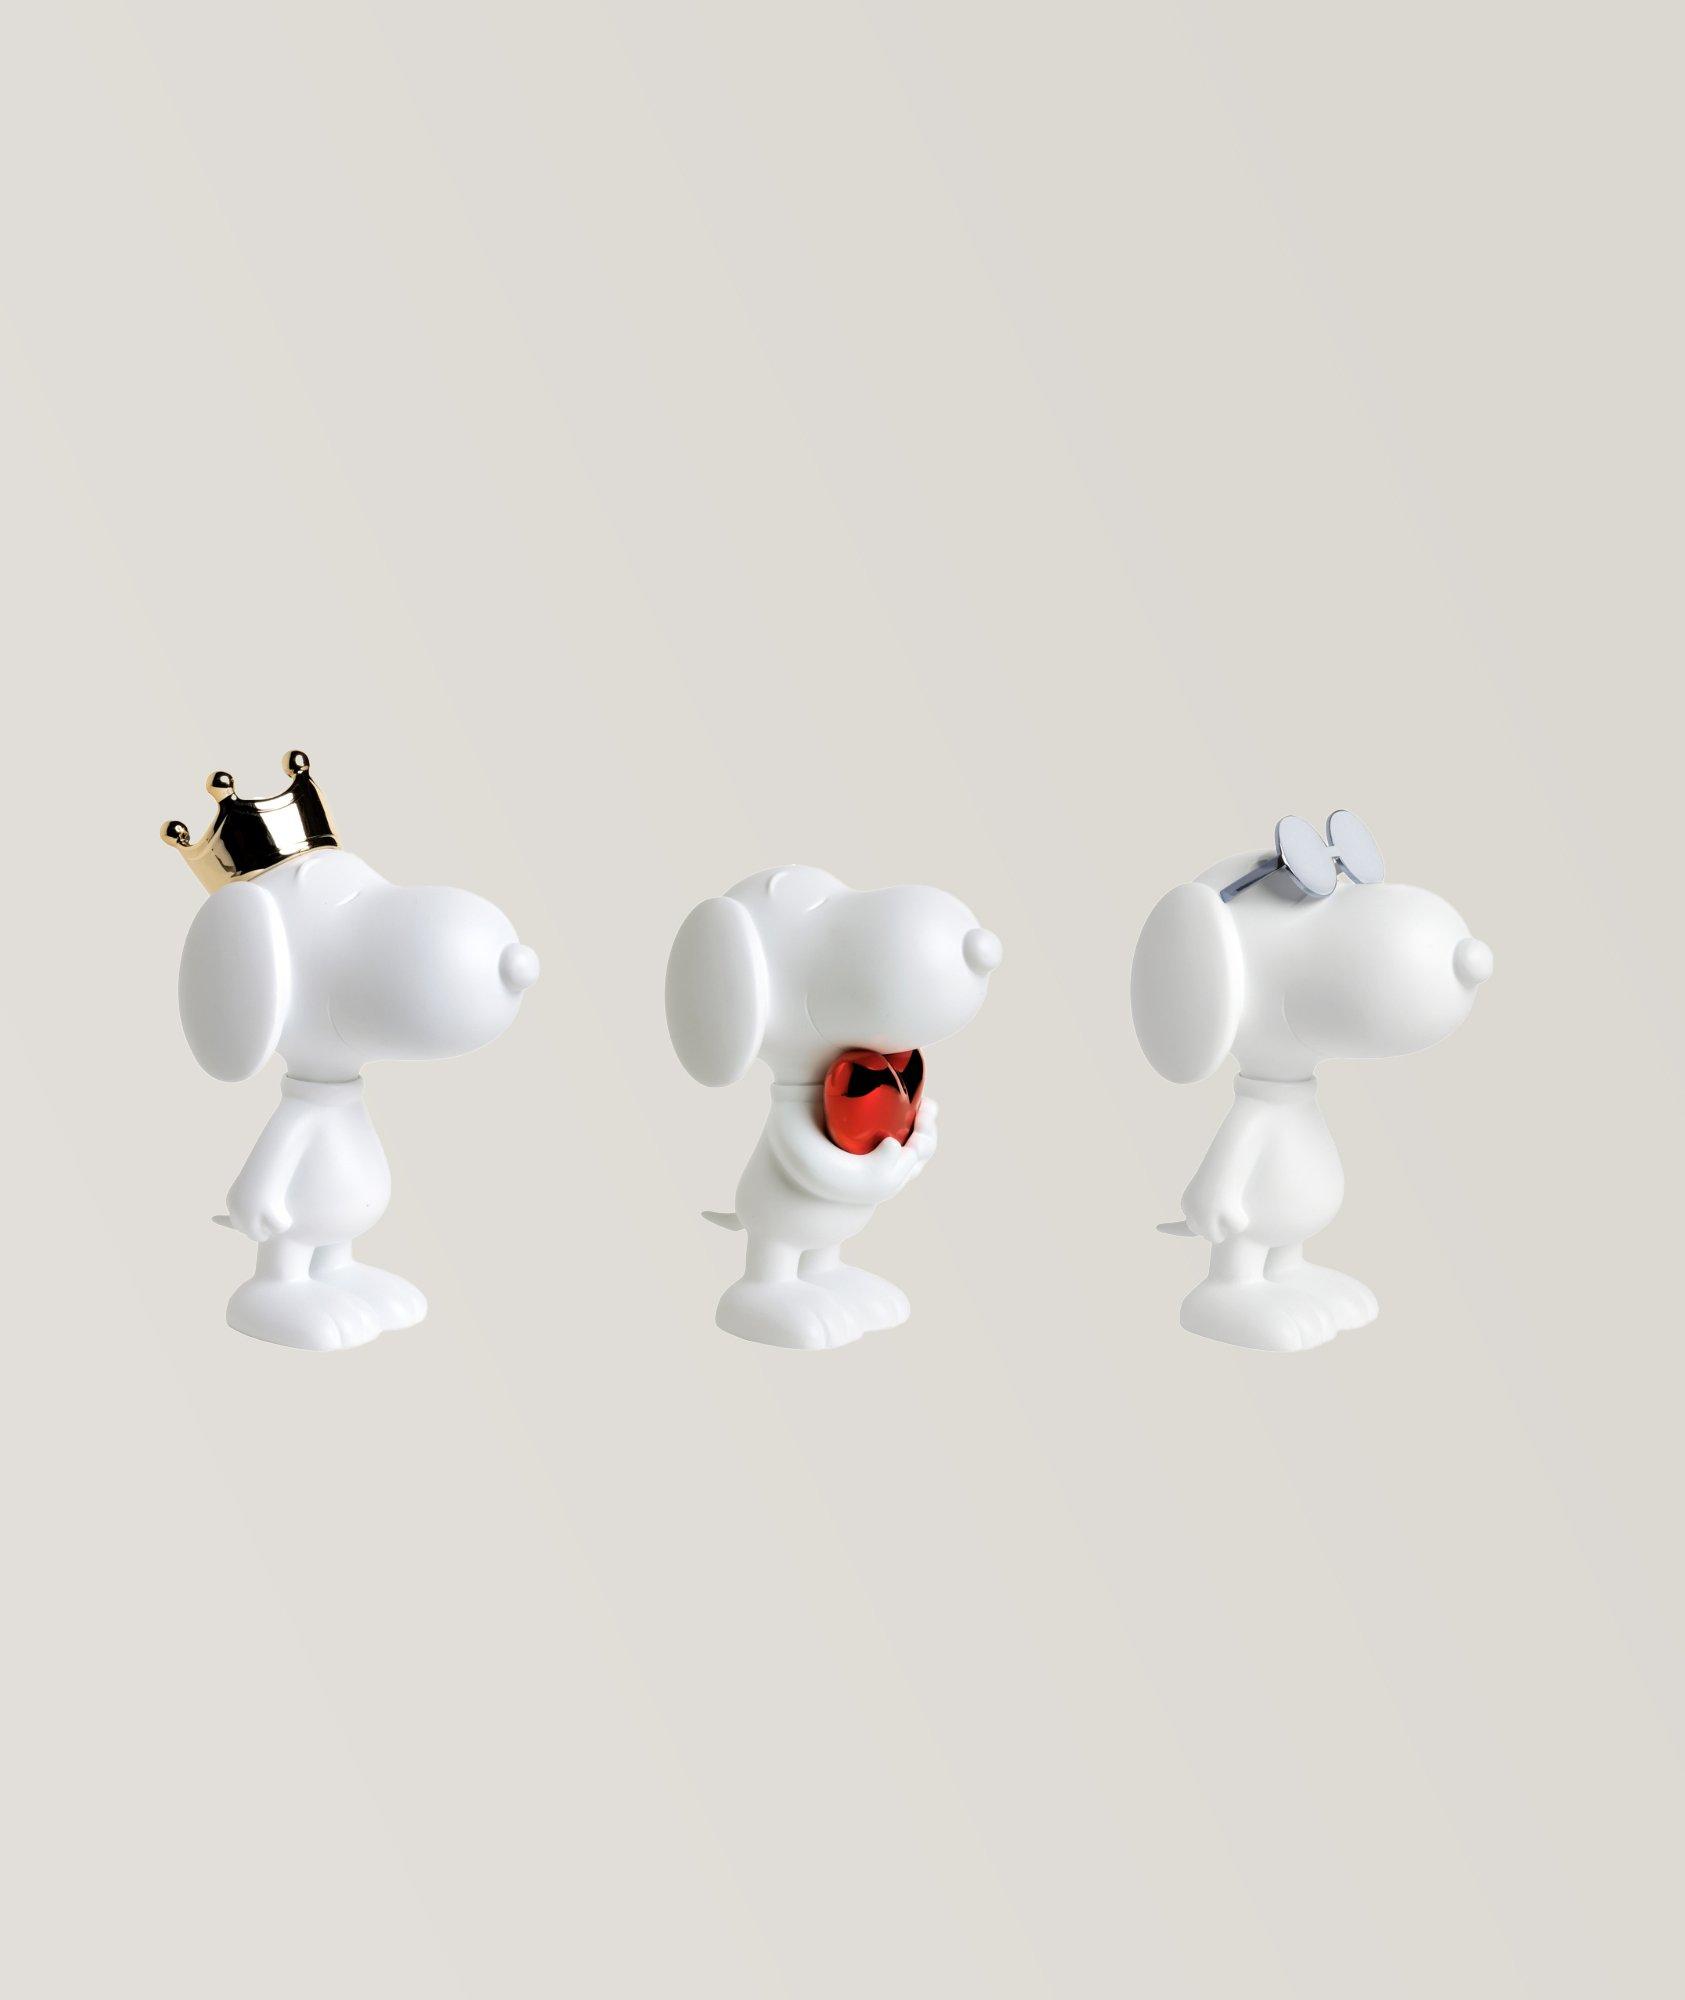 Peanuts Collections Snoopy 3 Set image 0